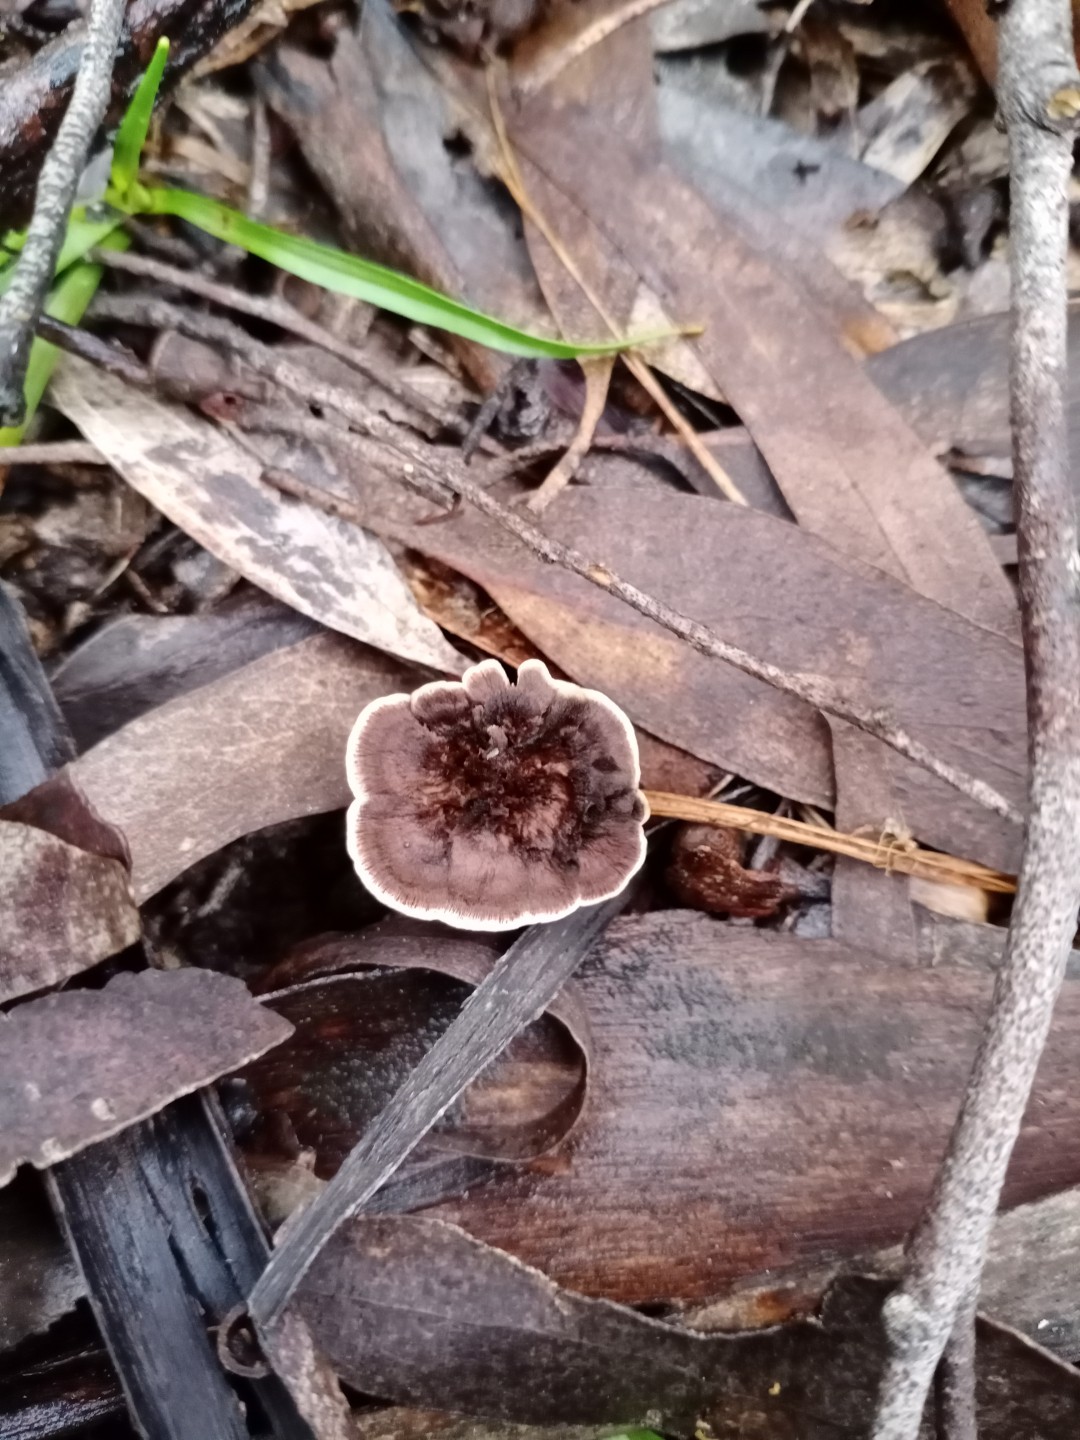 Tiger's eye fungus (Coltricia)